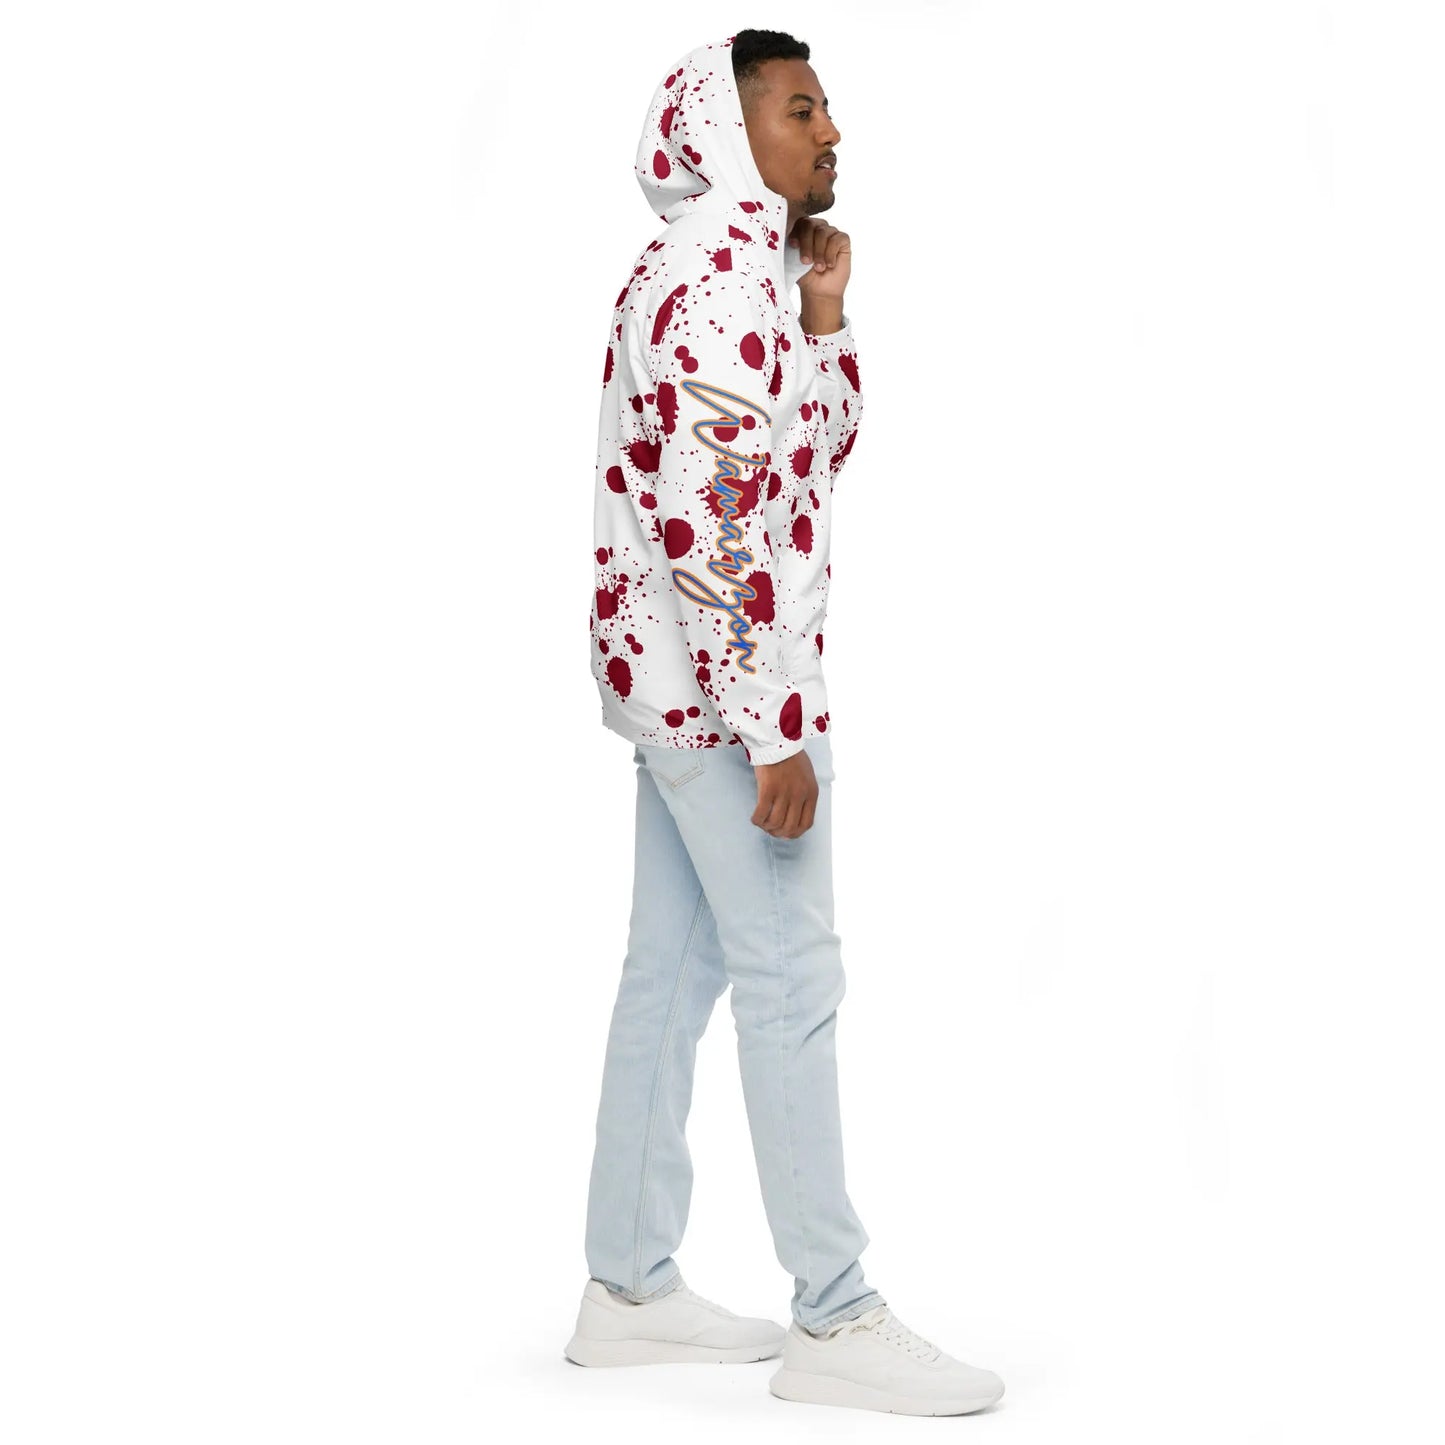 Wamarzon's Ghosted Men’s windbreaker - Image #10